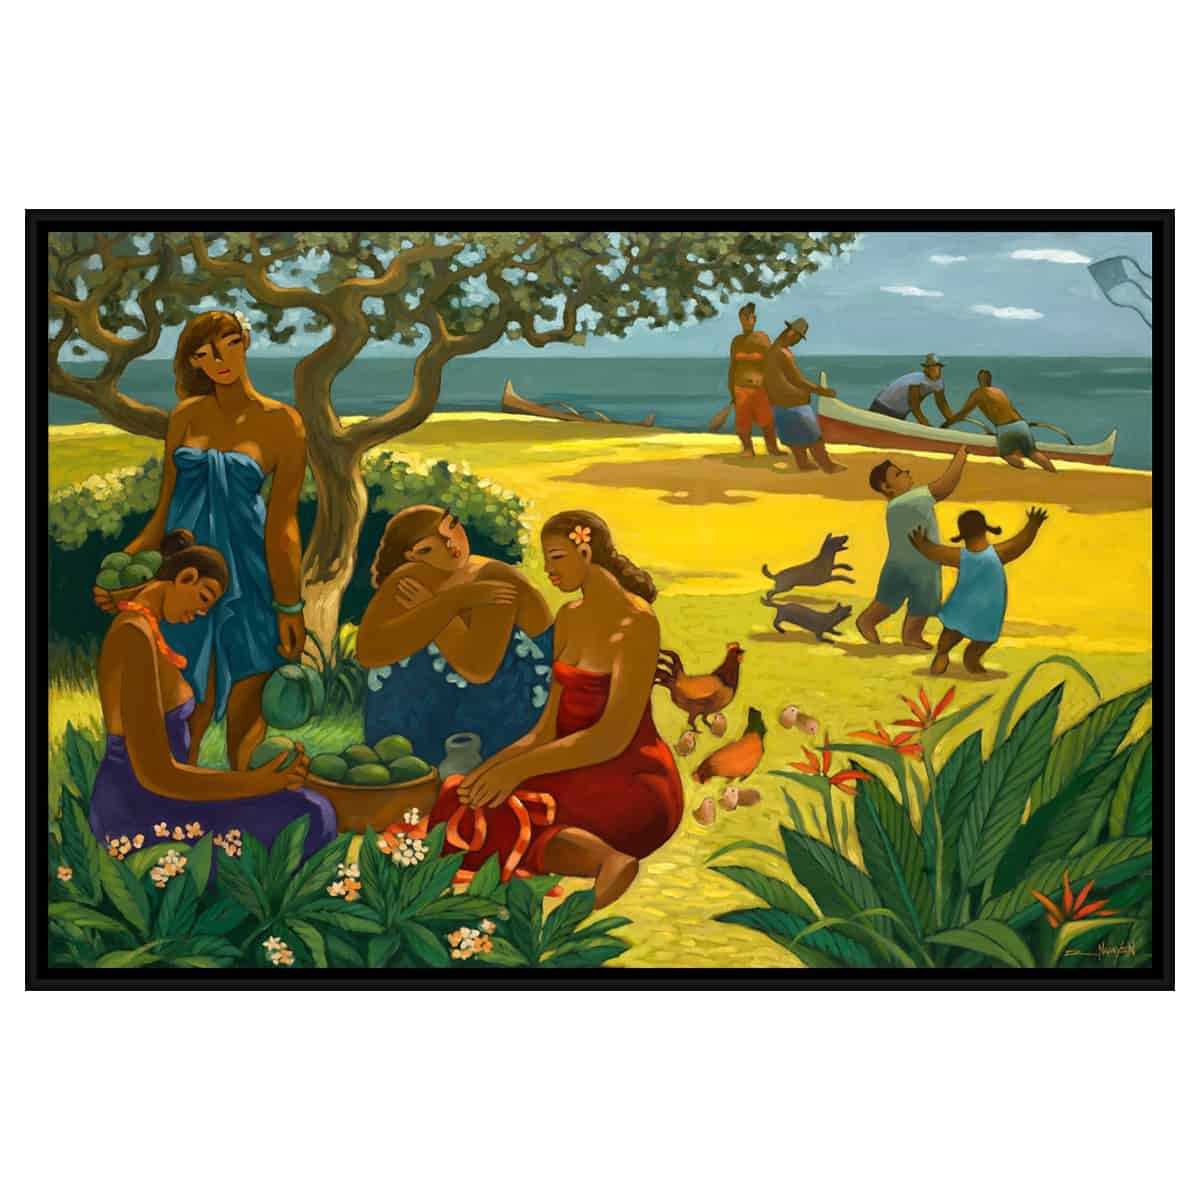 A framed canvas art print featuring Hawaiian beach activities with women gathering fruit, kids playing with dogs and chickens and men pulling in an outrigger canoe by Hawaii artist Tim Nguyen